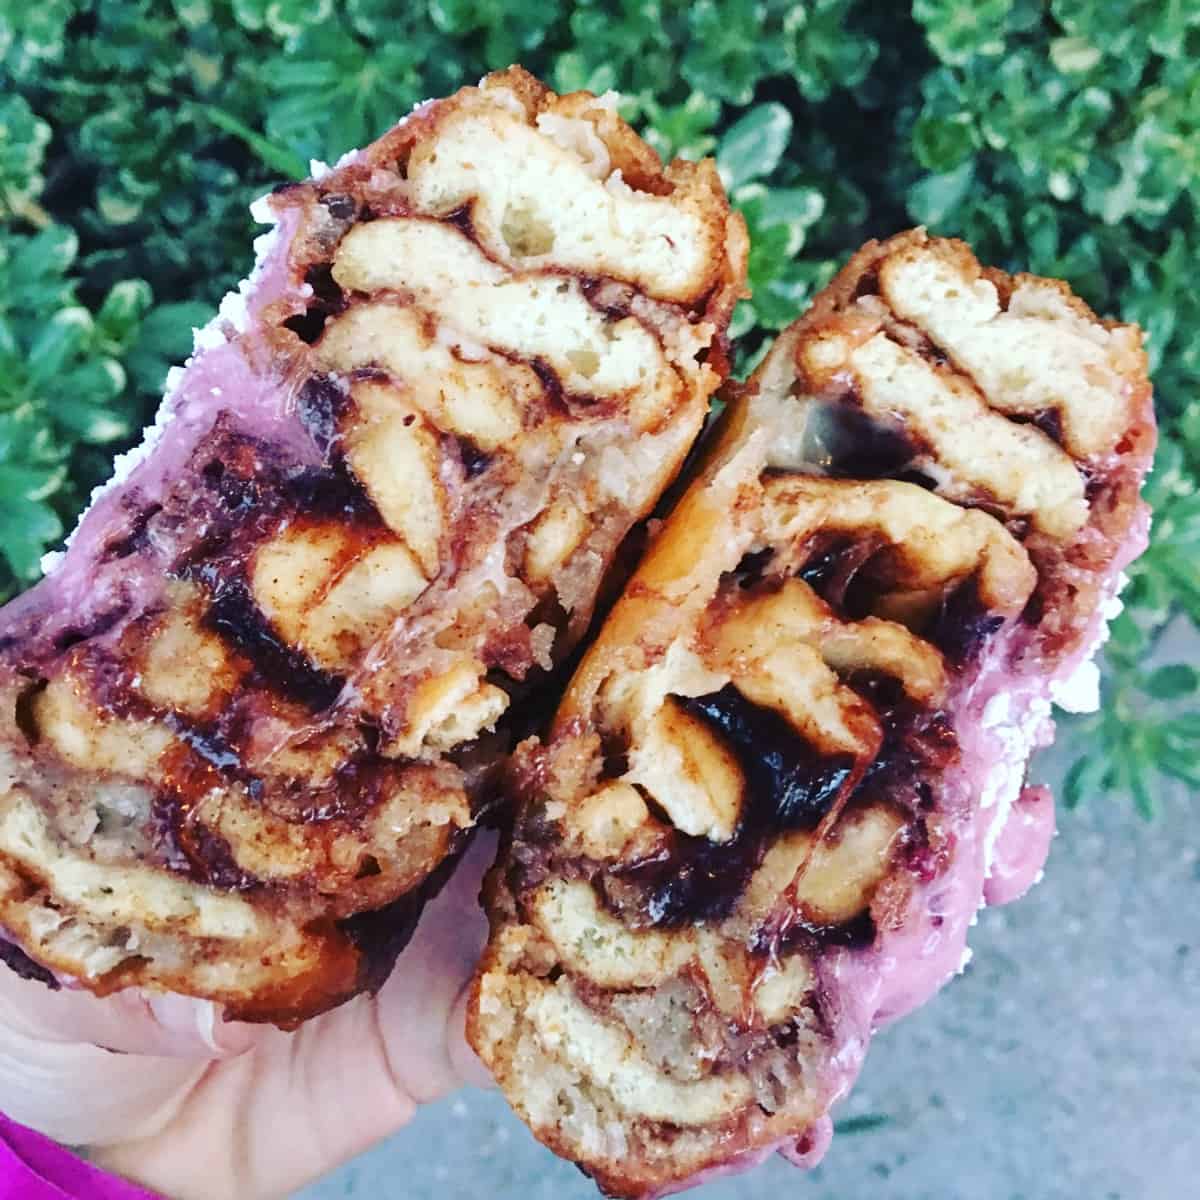 A deep fried cinnamon roll with boysenberry cream cheese frosting